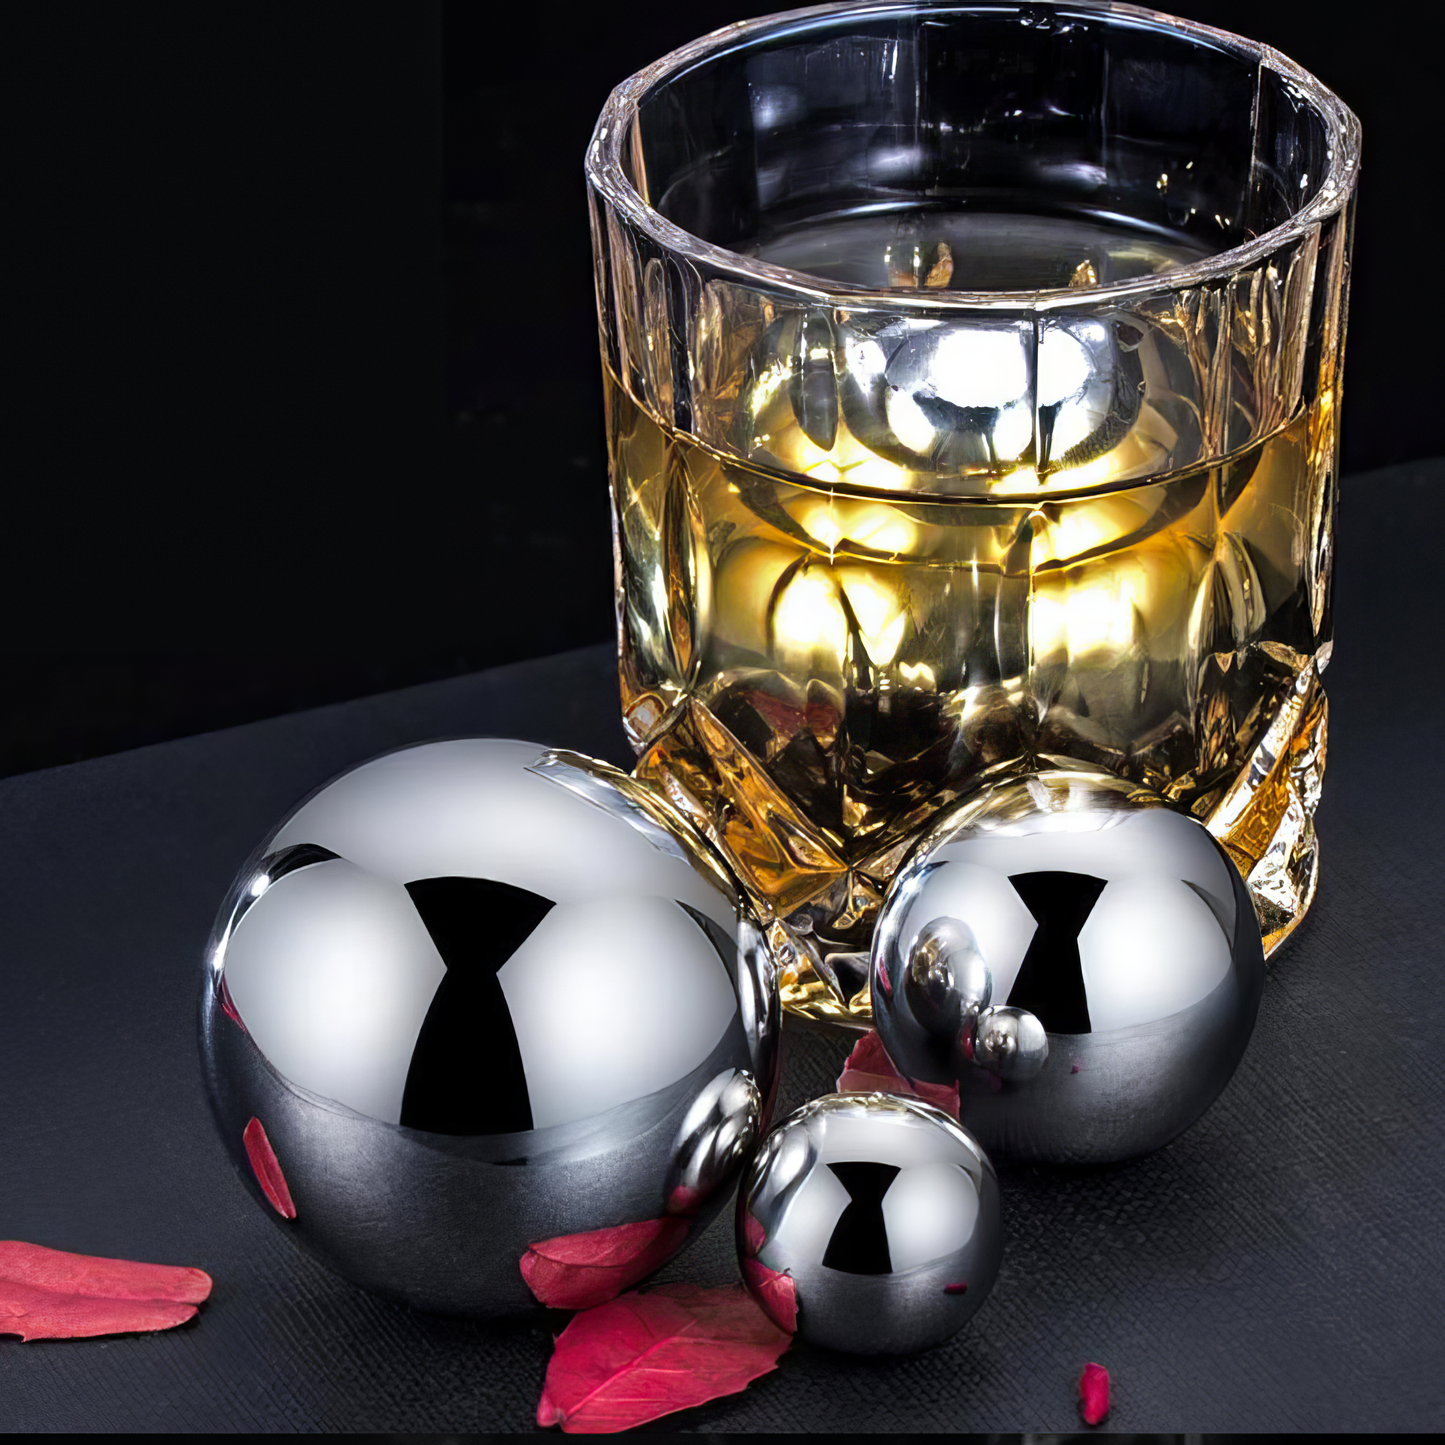 Stainless Steel Whiskey Ice Cube Ball 2" in a Muslin Bag